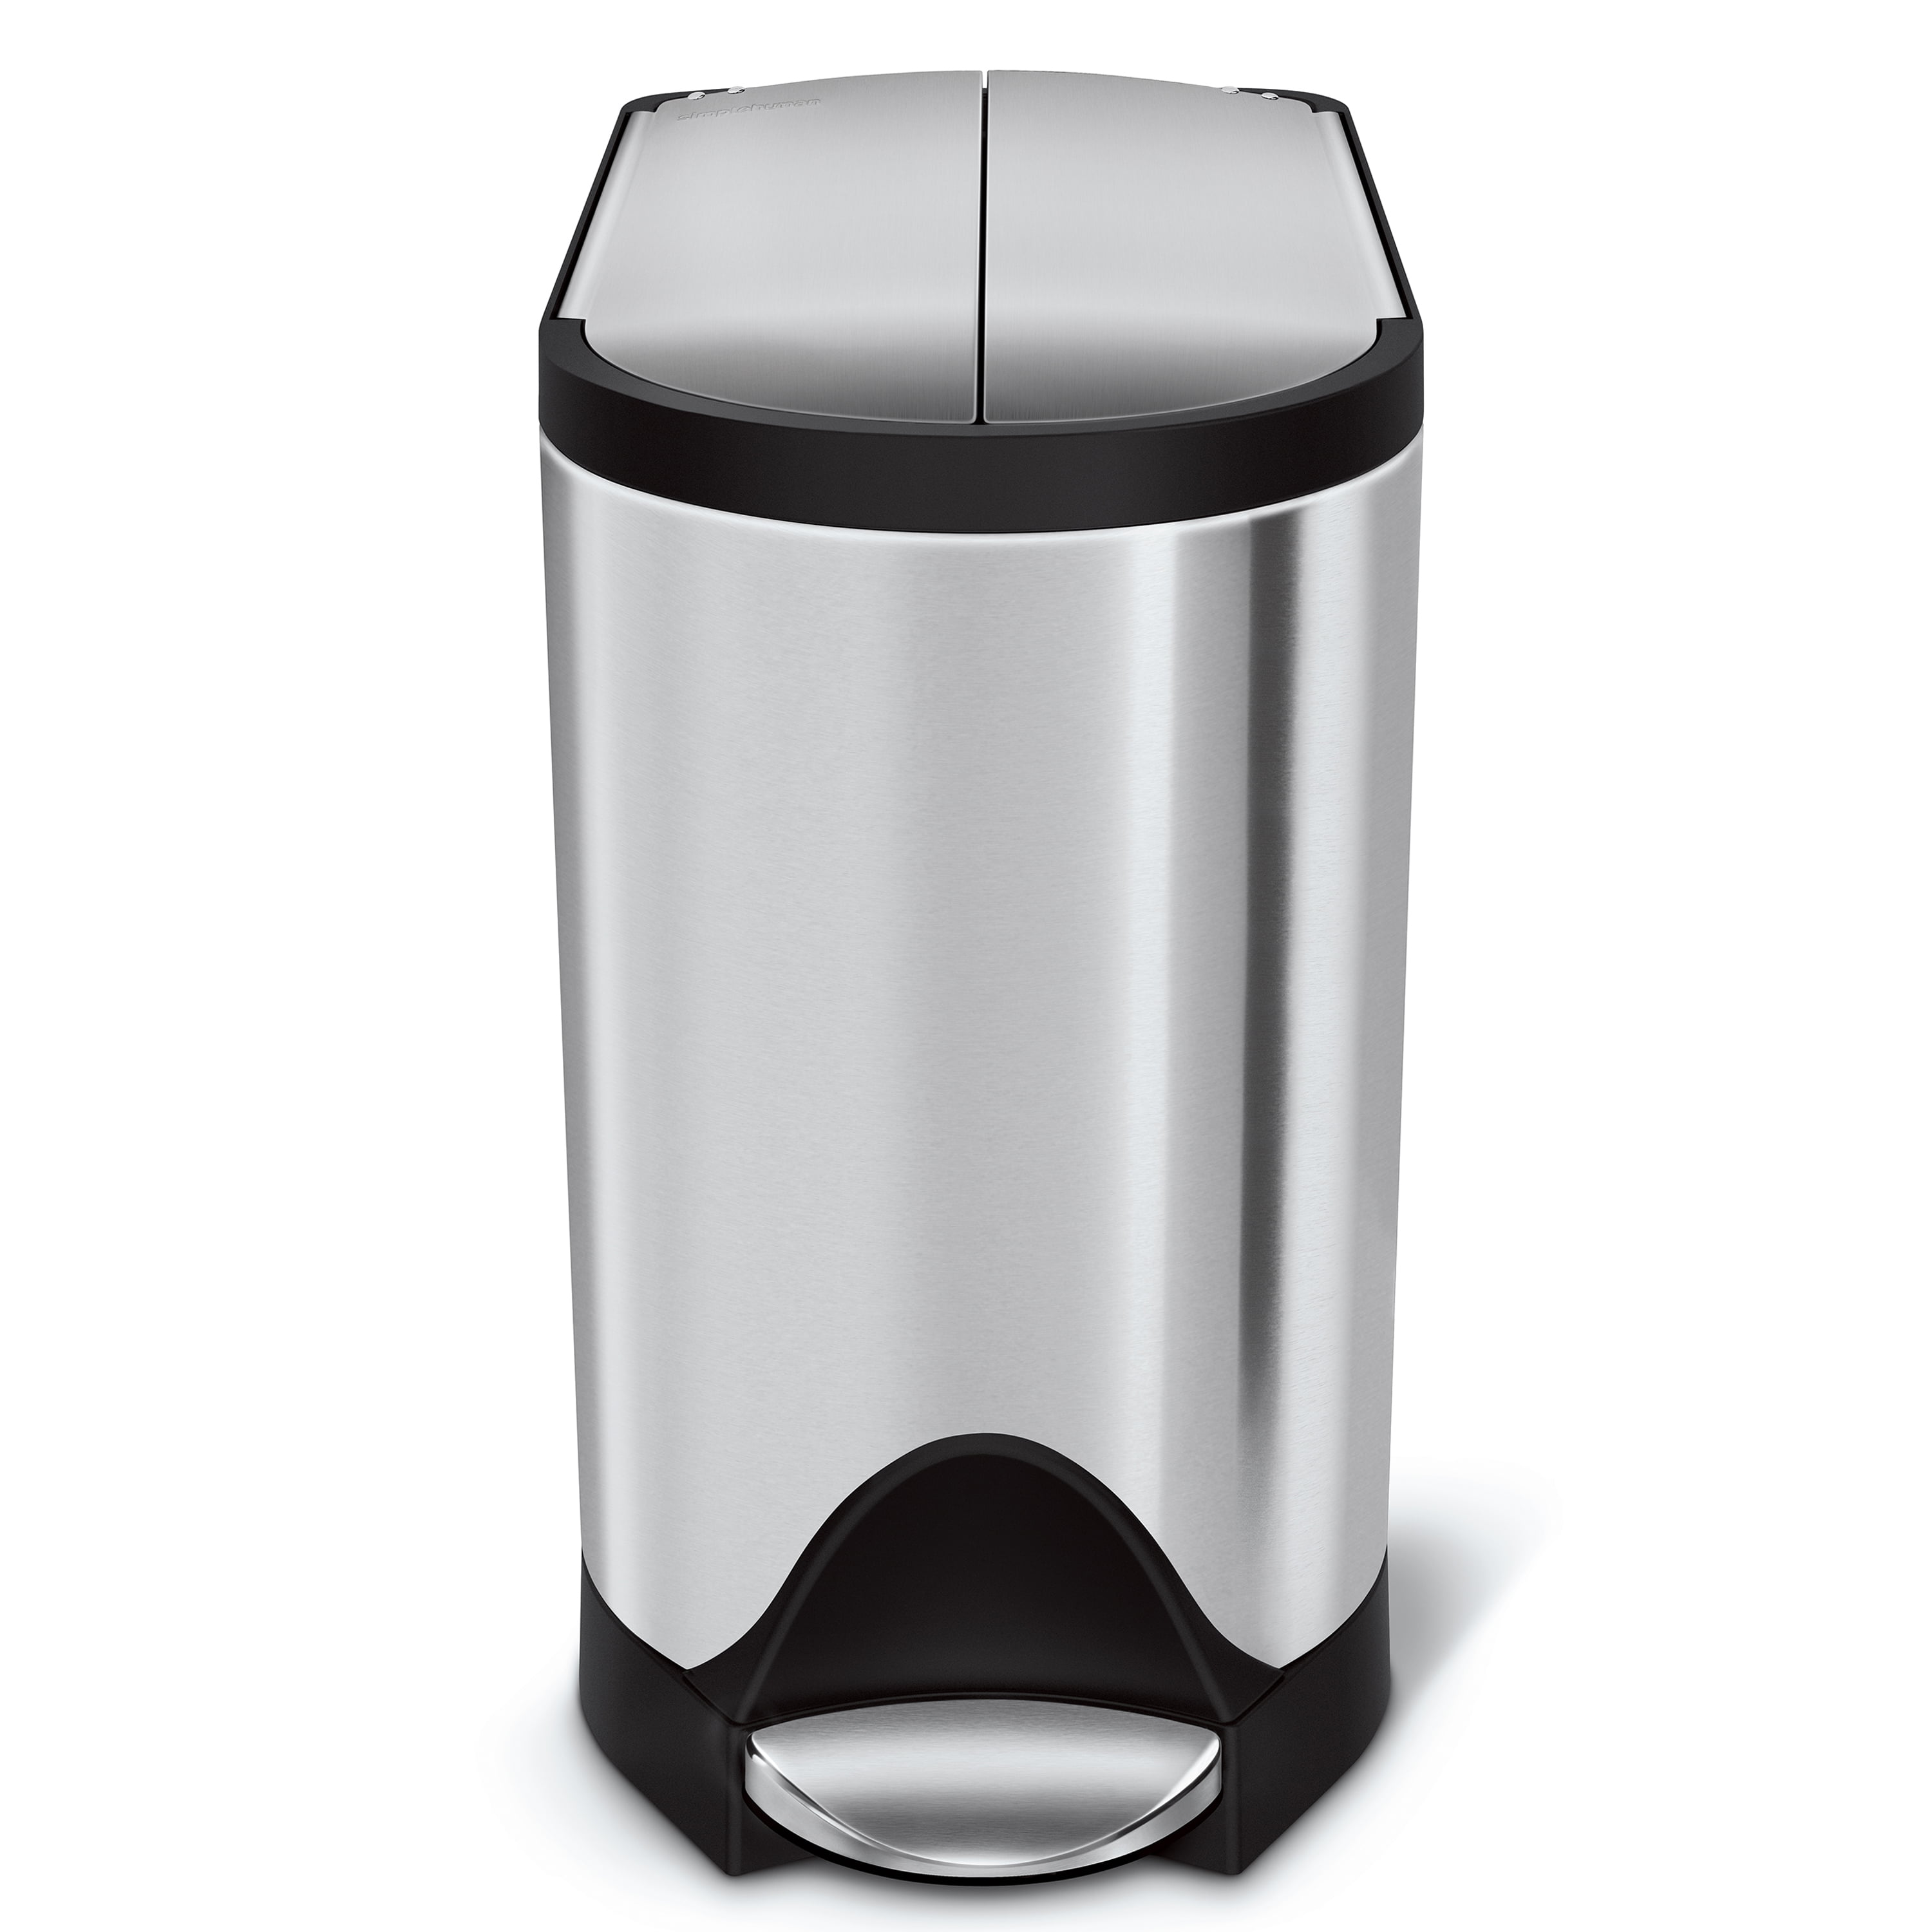 Brushed Stainless Steel Black & Gallon Round Bathroom Step Trash Can simplehuman 10 Liter / 2.6 Gallon in-Cabinet Trash Can Heavy-Duty Steel Frame 4.5 Liter / 1.2 Gallon 